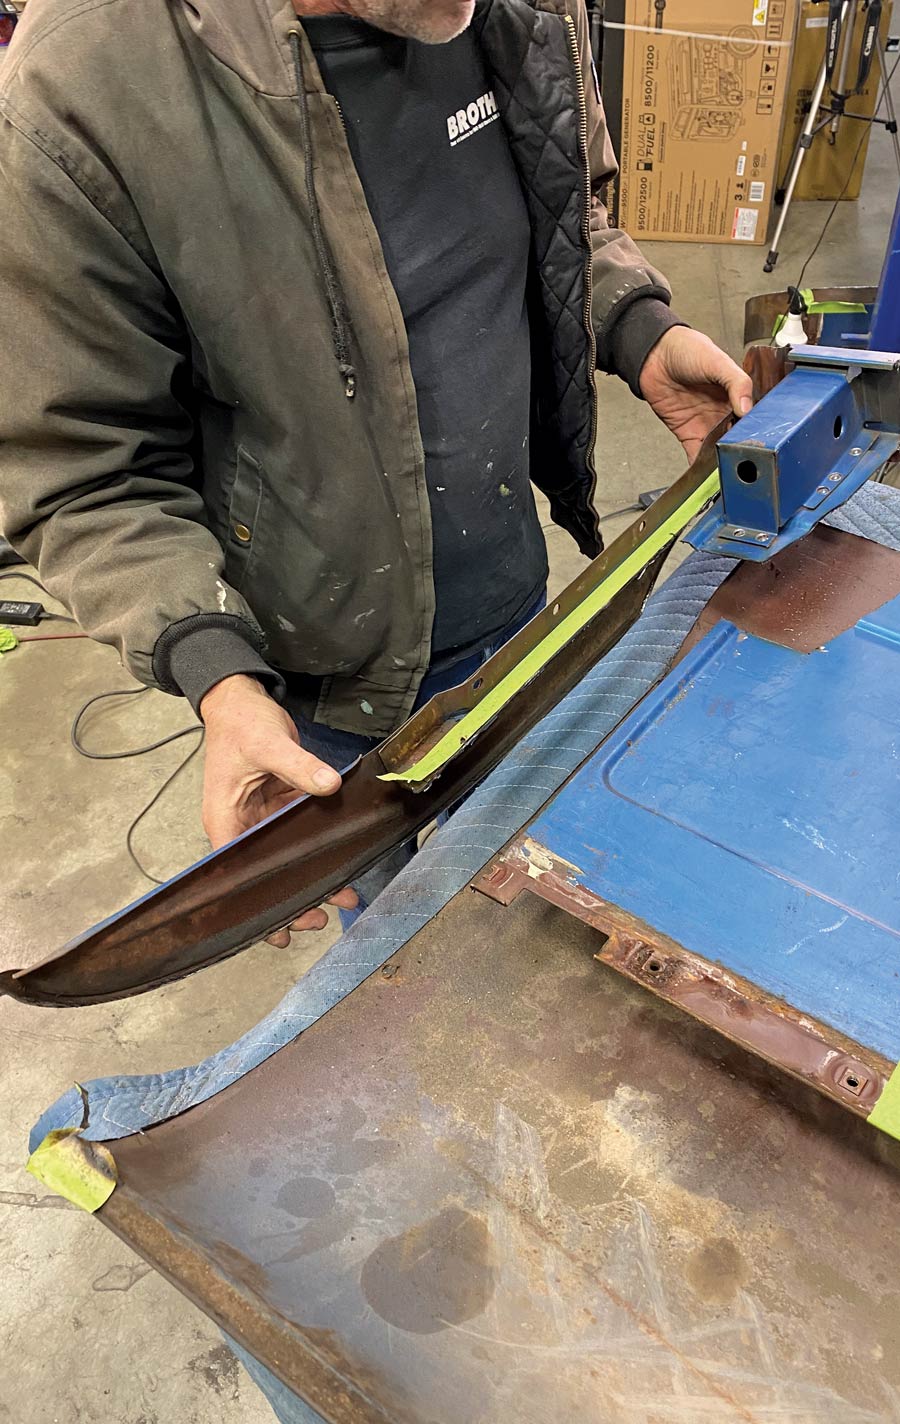 After completing your dogleg cut on the bedrail, trim the panel around the pocket, as shown, then proceed with cutting the leading edge—if done correctly, your forward section should come off in one piece.